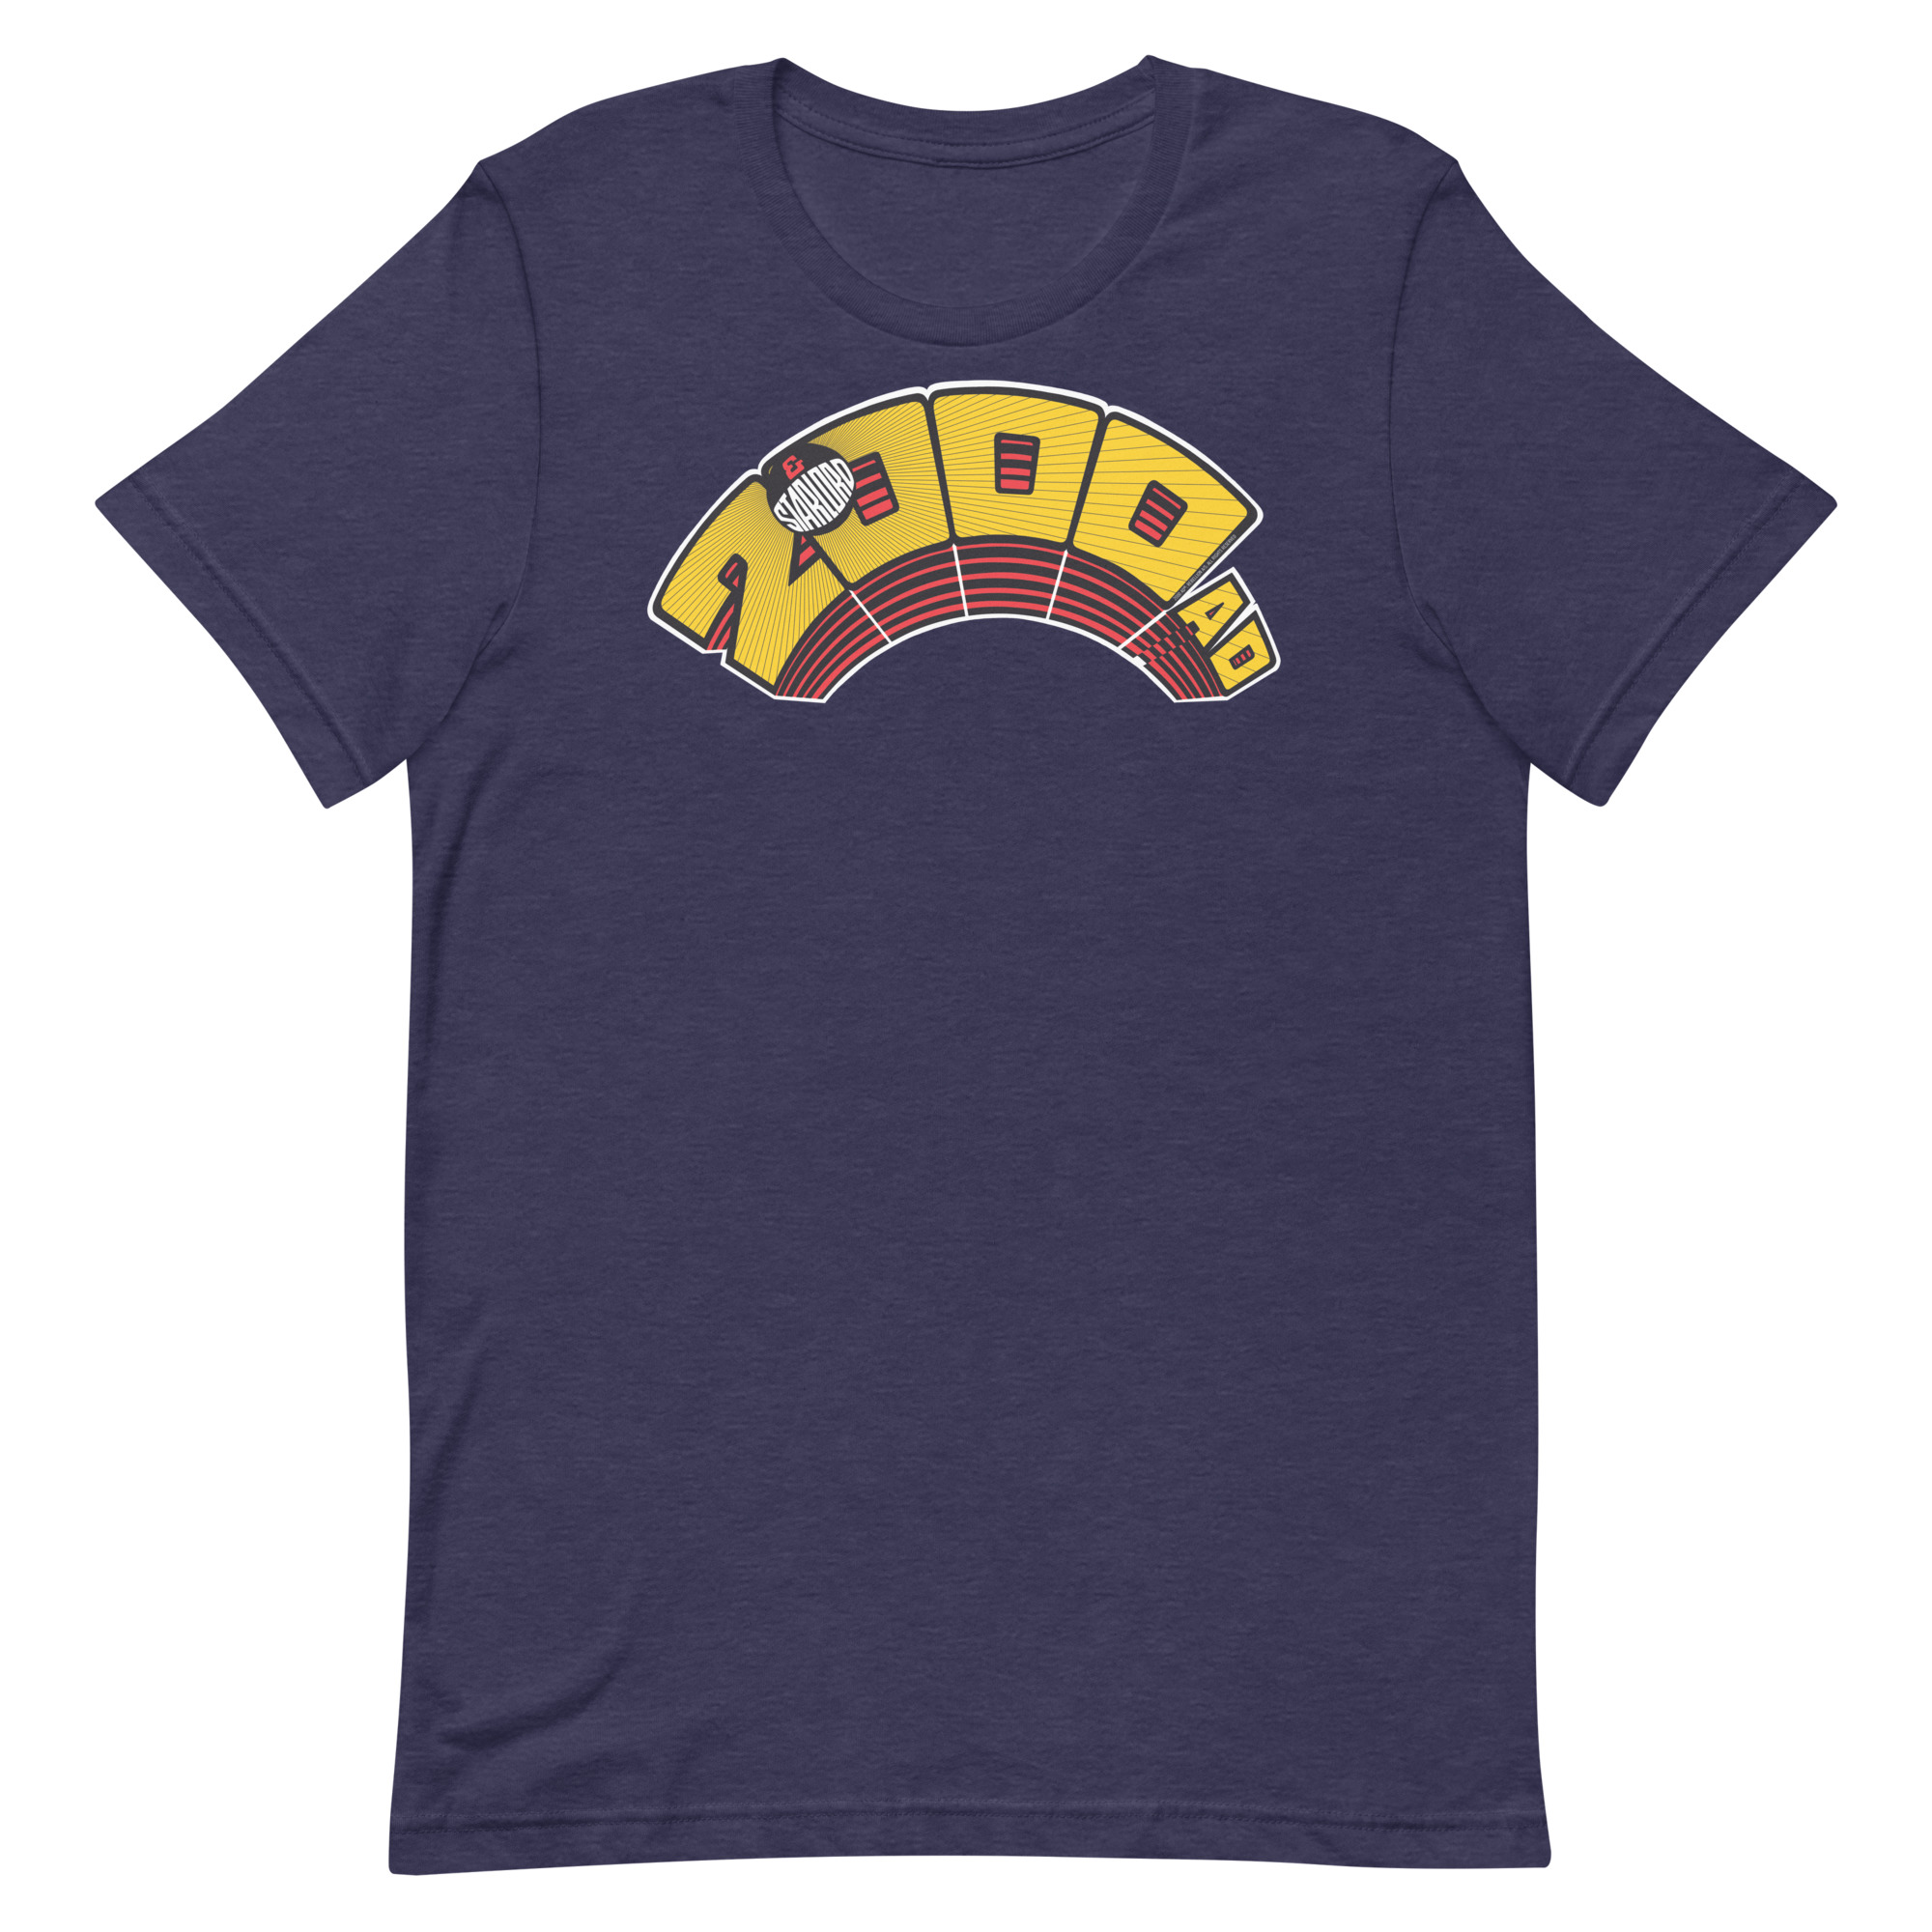 Image of a Midnight Navy coloured 2000AD Starlord Arch t-shirt featuring a large 2000AD Starlord Arch logo in the middle